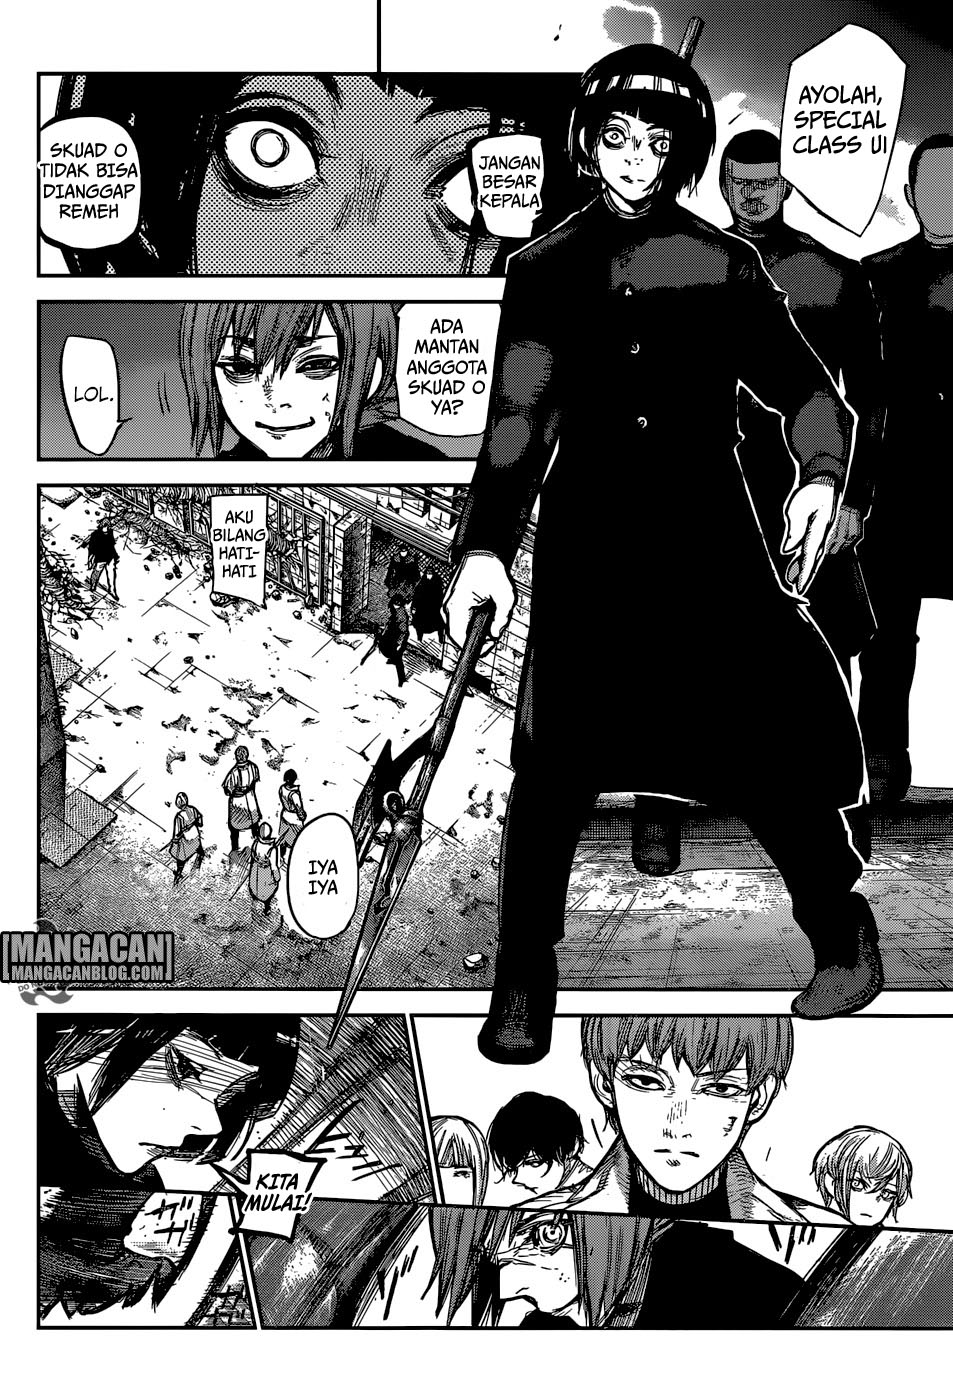 Tokyo Ghoul:re Chapter 139